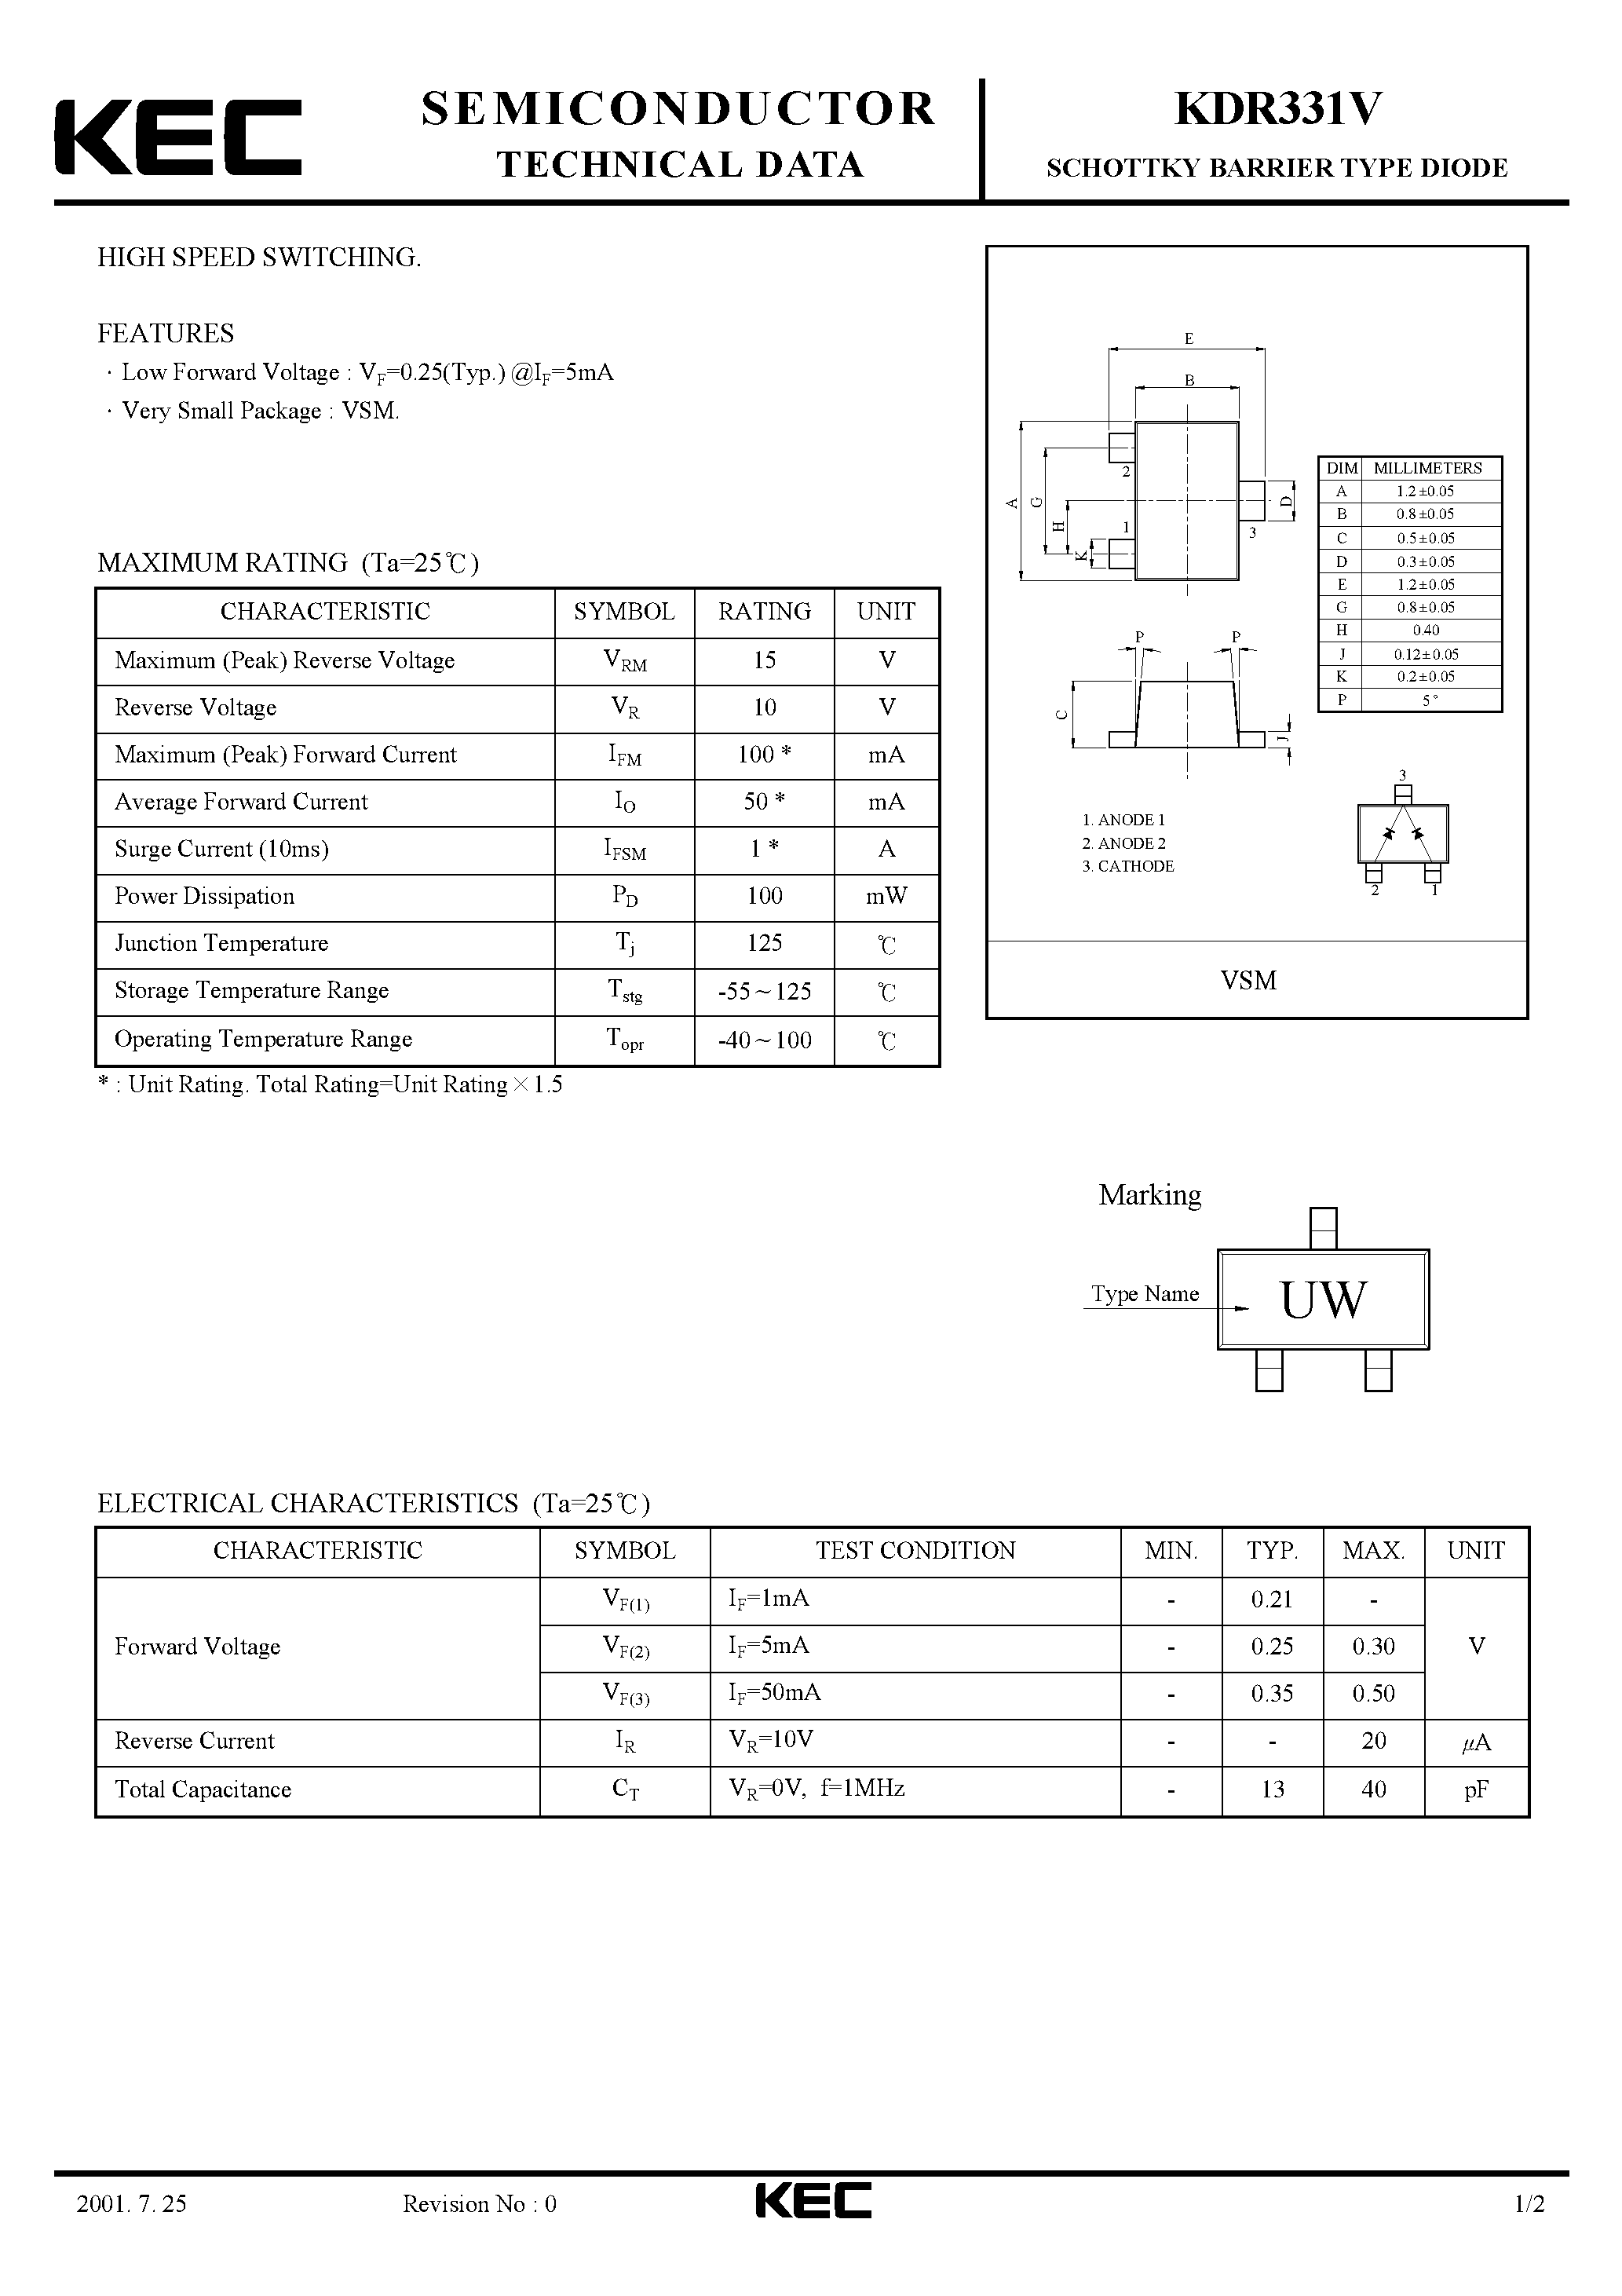 Datasheet KDR331V - SCHOTTKY BARRIER TYPE DIODE(HIGH SPEED SWITCHING) page 1